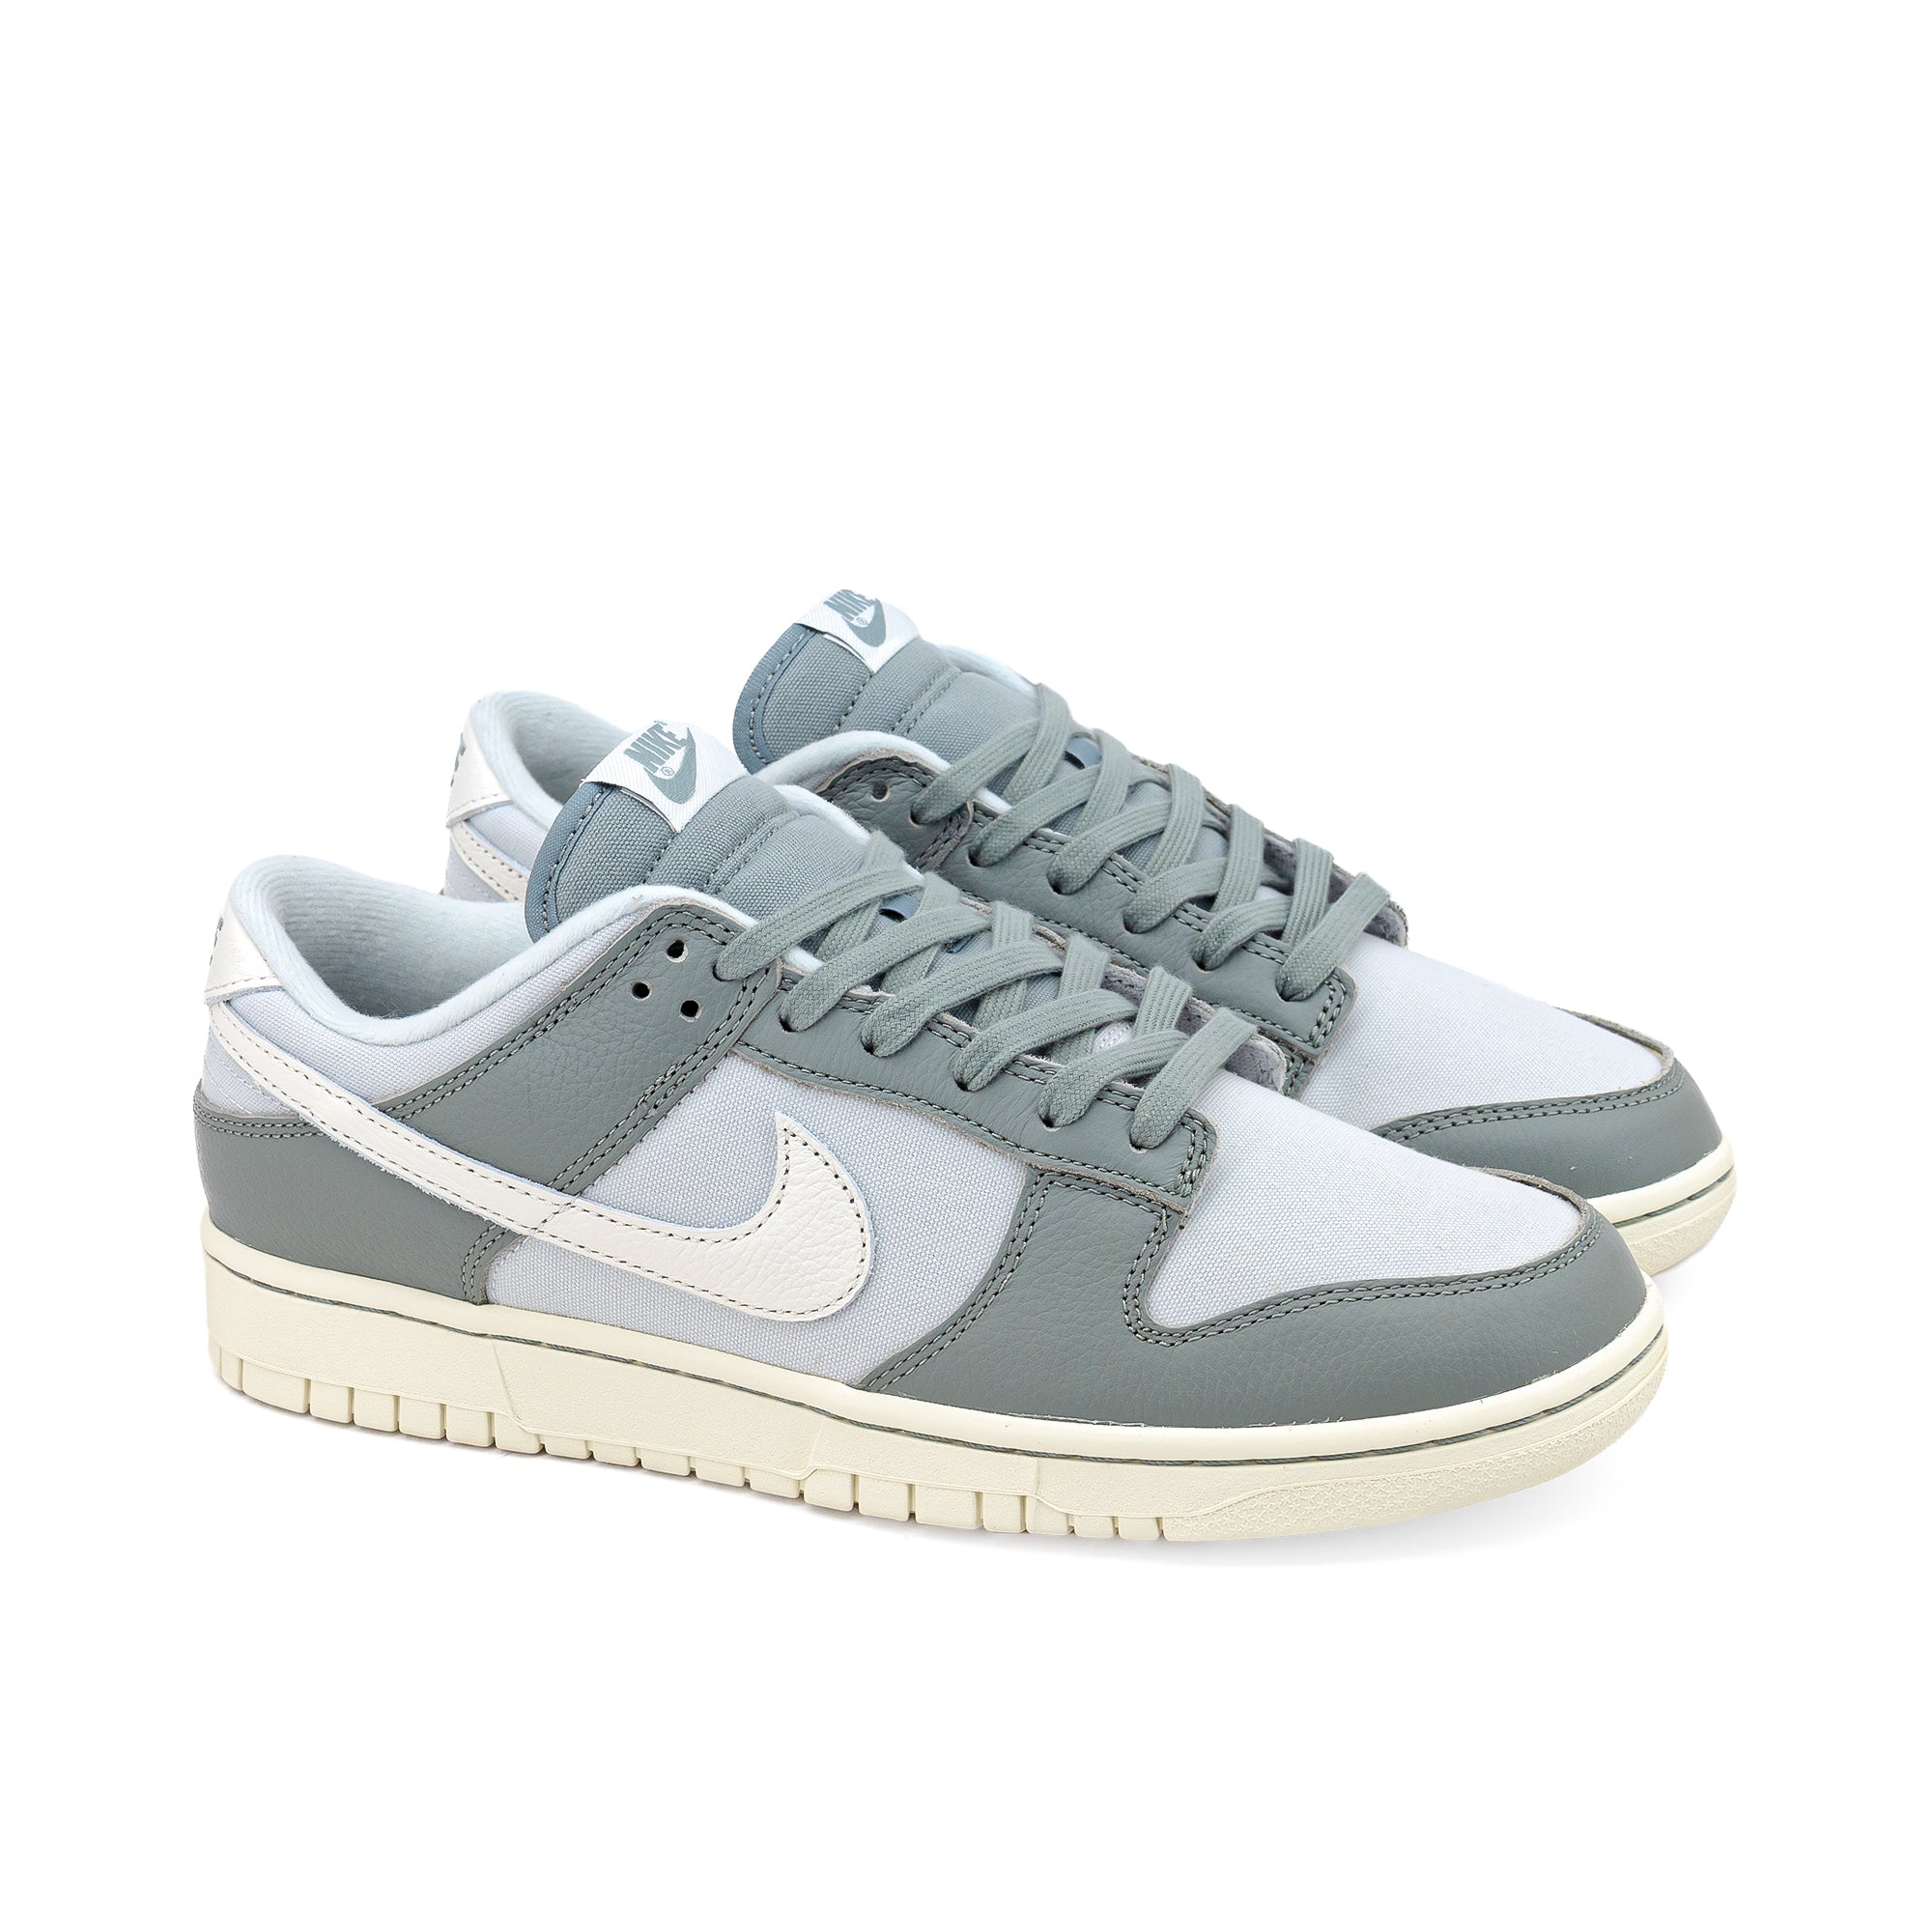 Nike Dunk Low Retro PRM "Mica – Laced